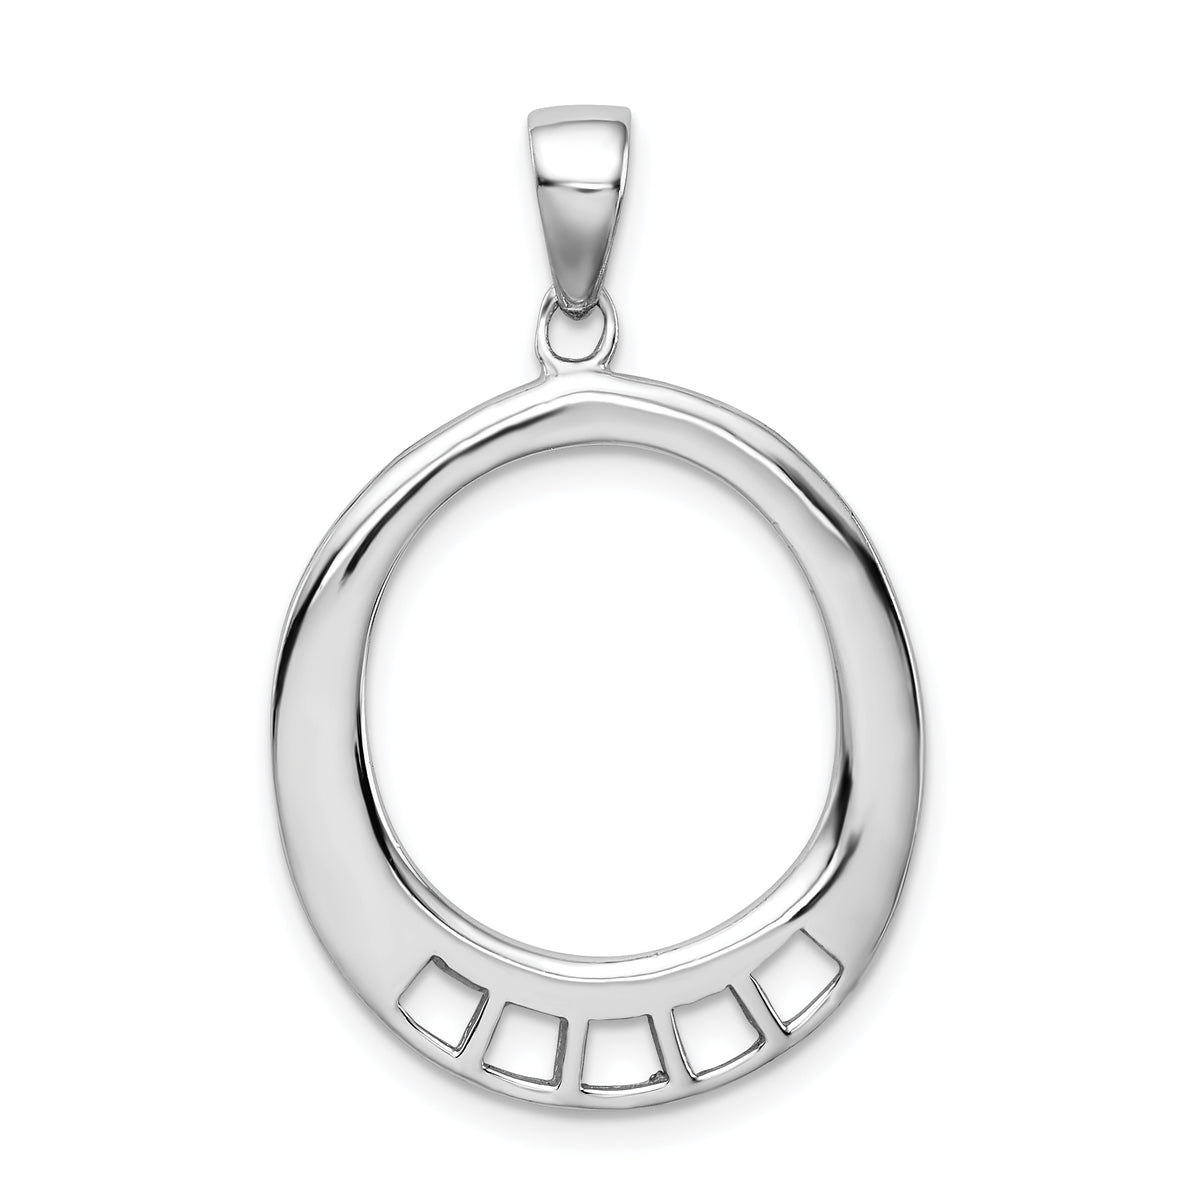 Amore La Vita Sterling Silver Rhodium-plated Polished Oval Shaped Charm Carrier Pendant